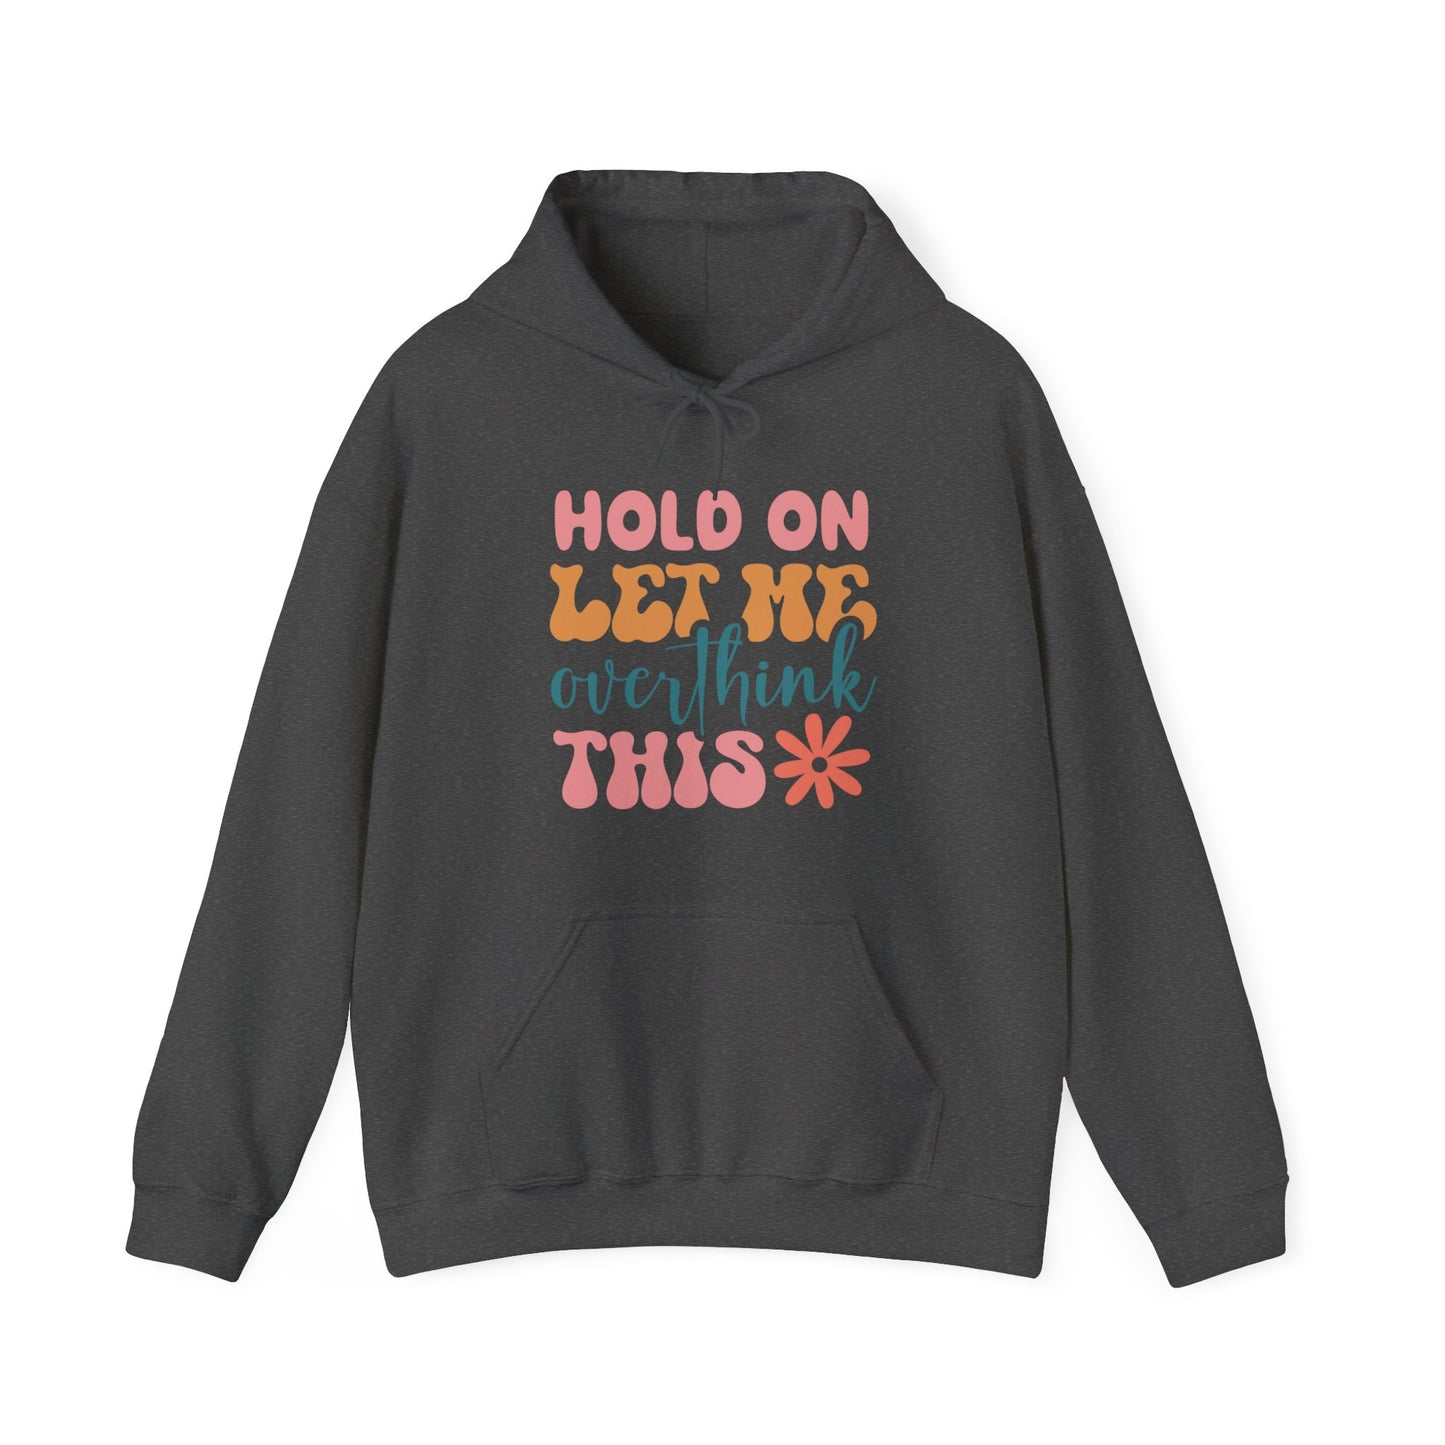 Hold on Let me Overthink This - Hooded Sweatshirt